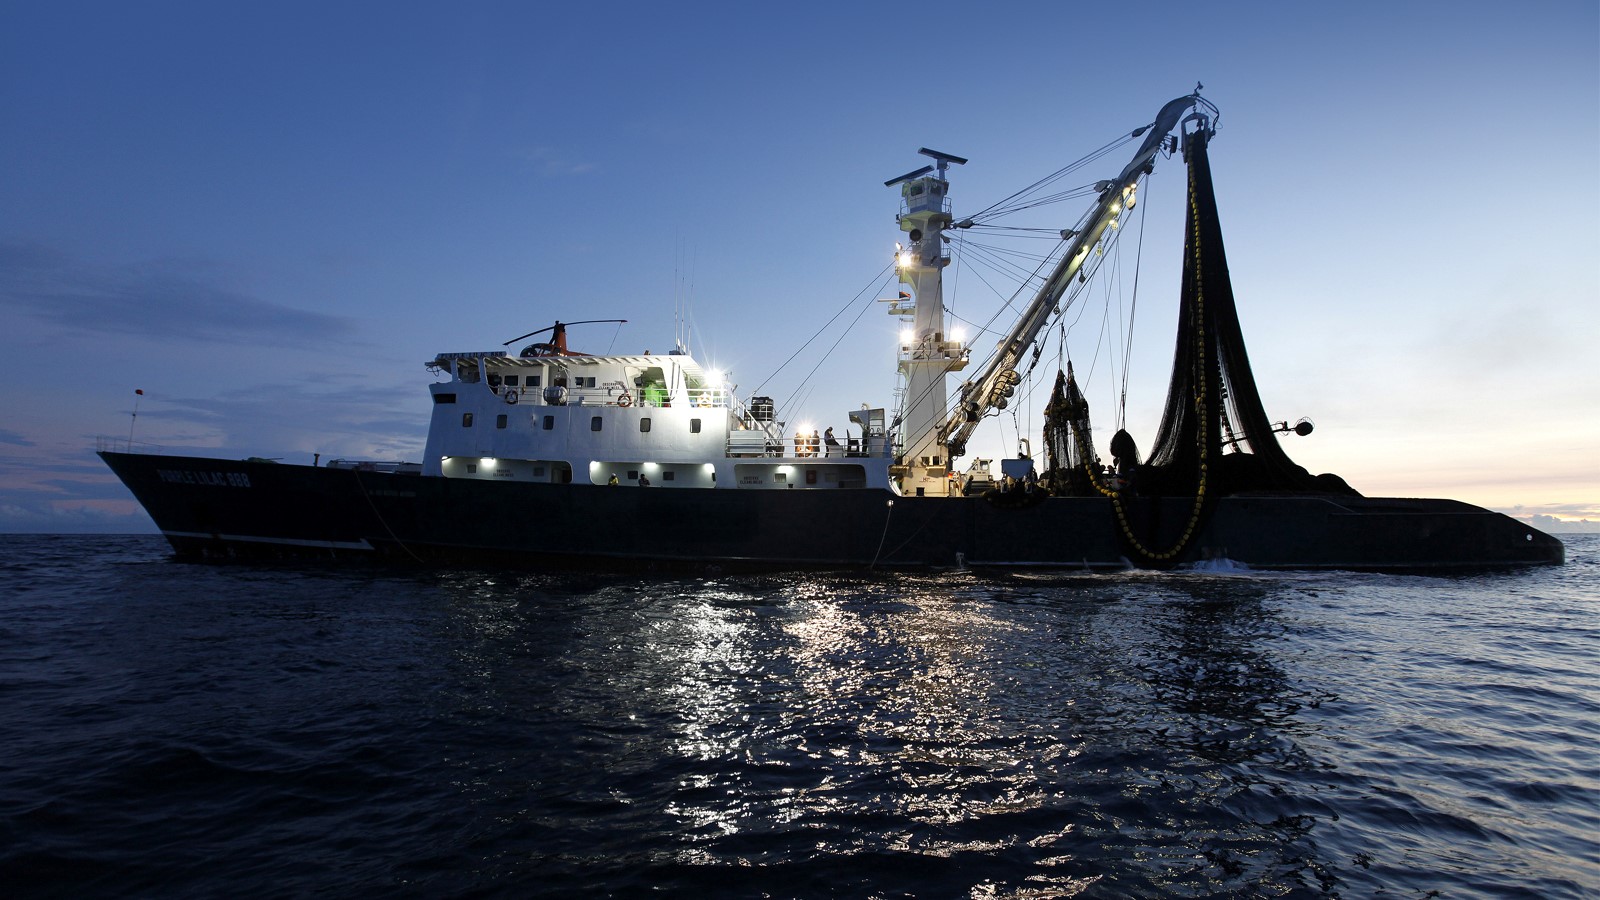 Purse Seiner Hauling In Net While Fishing For Salmon High-Res Stock Photo -  Getty Images